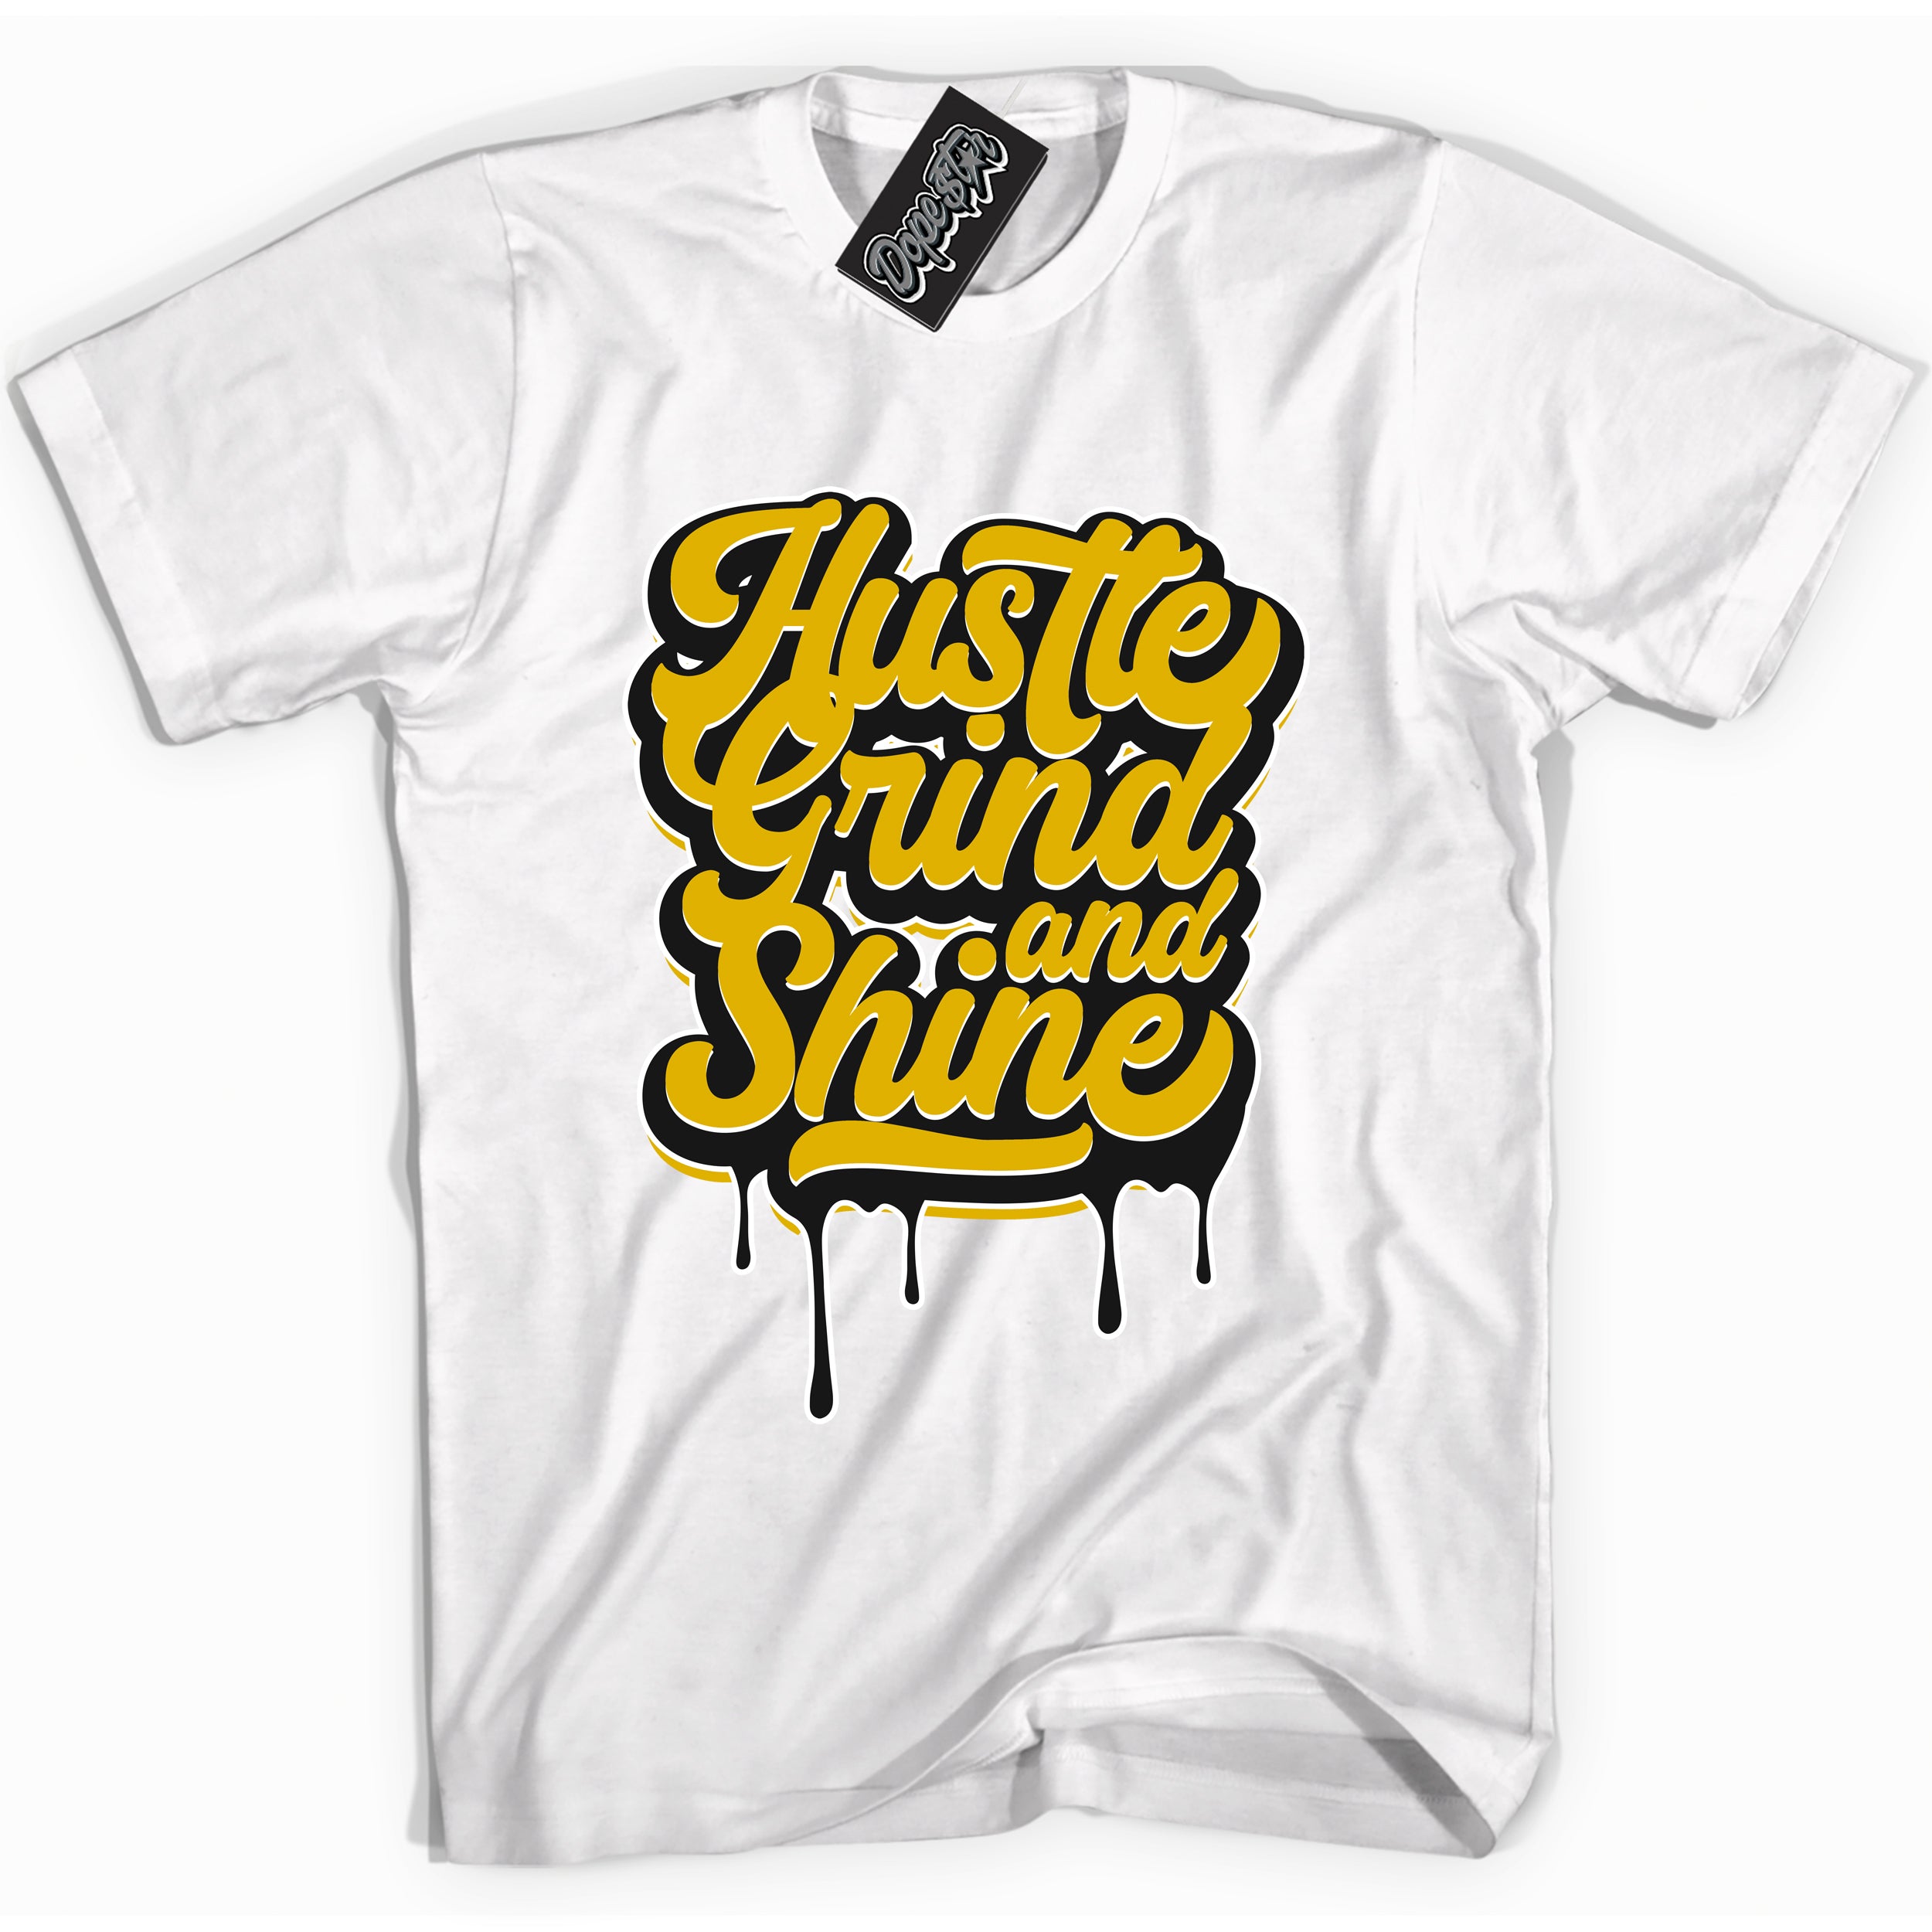 Cool White Shirt with “ Hustle Grind And Shine” design that perfectly matches Yellow Ochre 6s Sneakers.